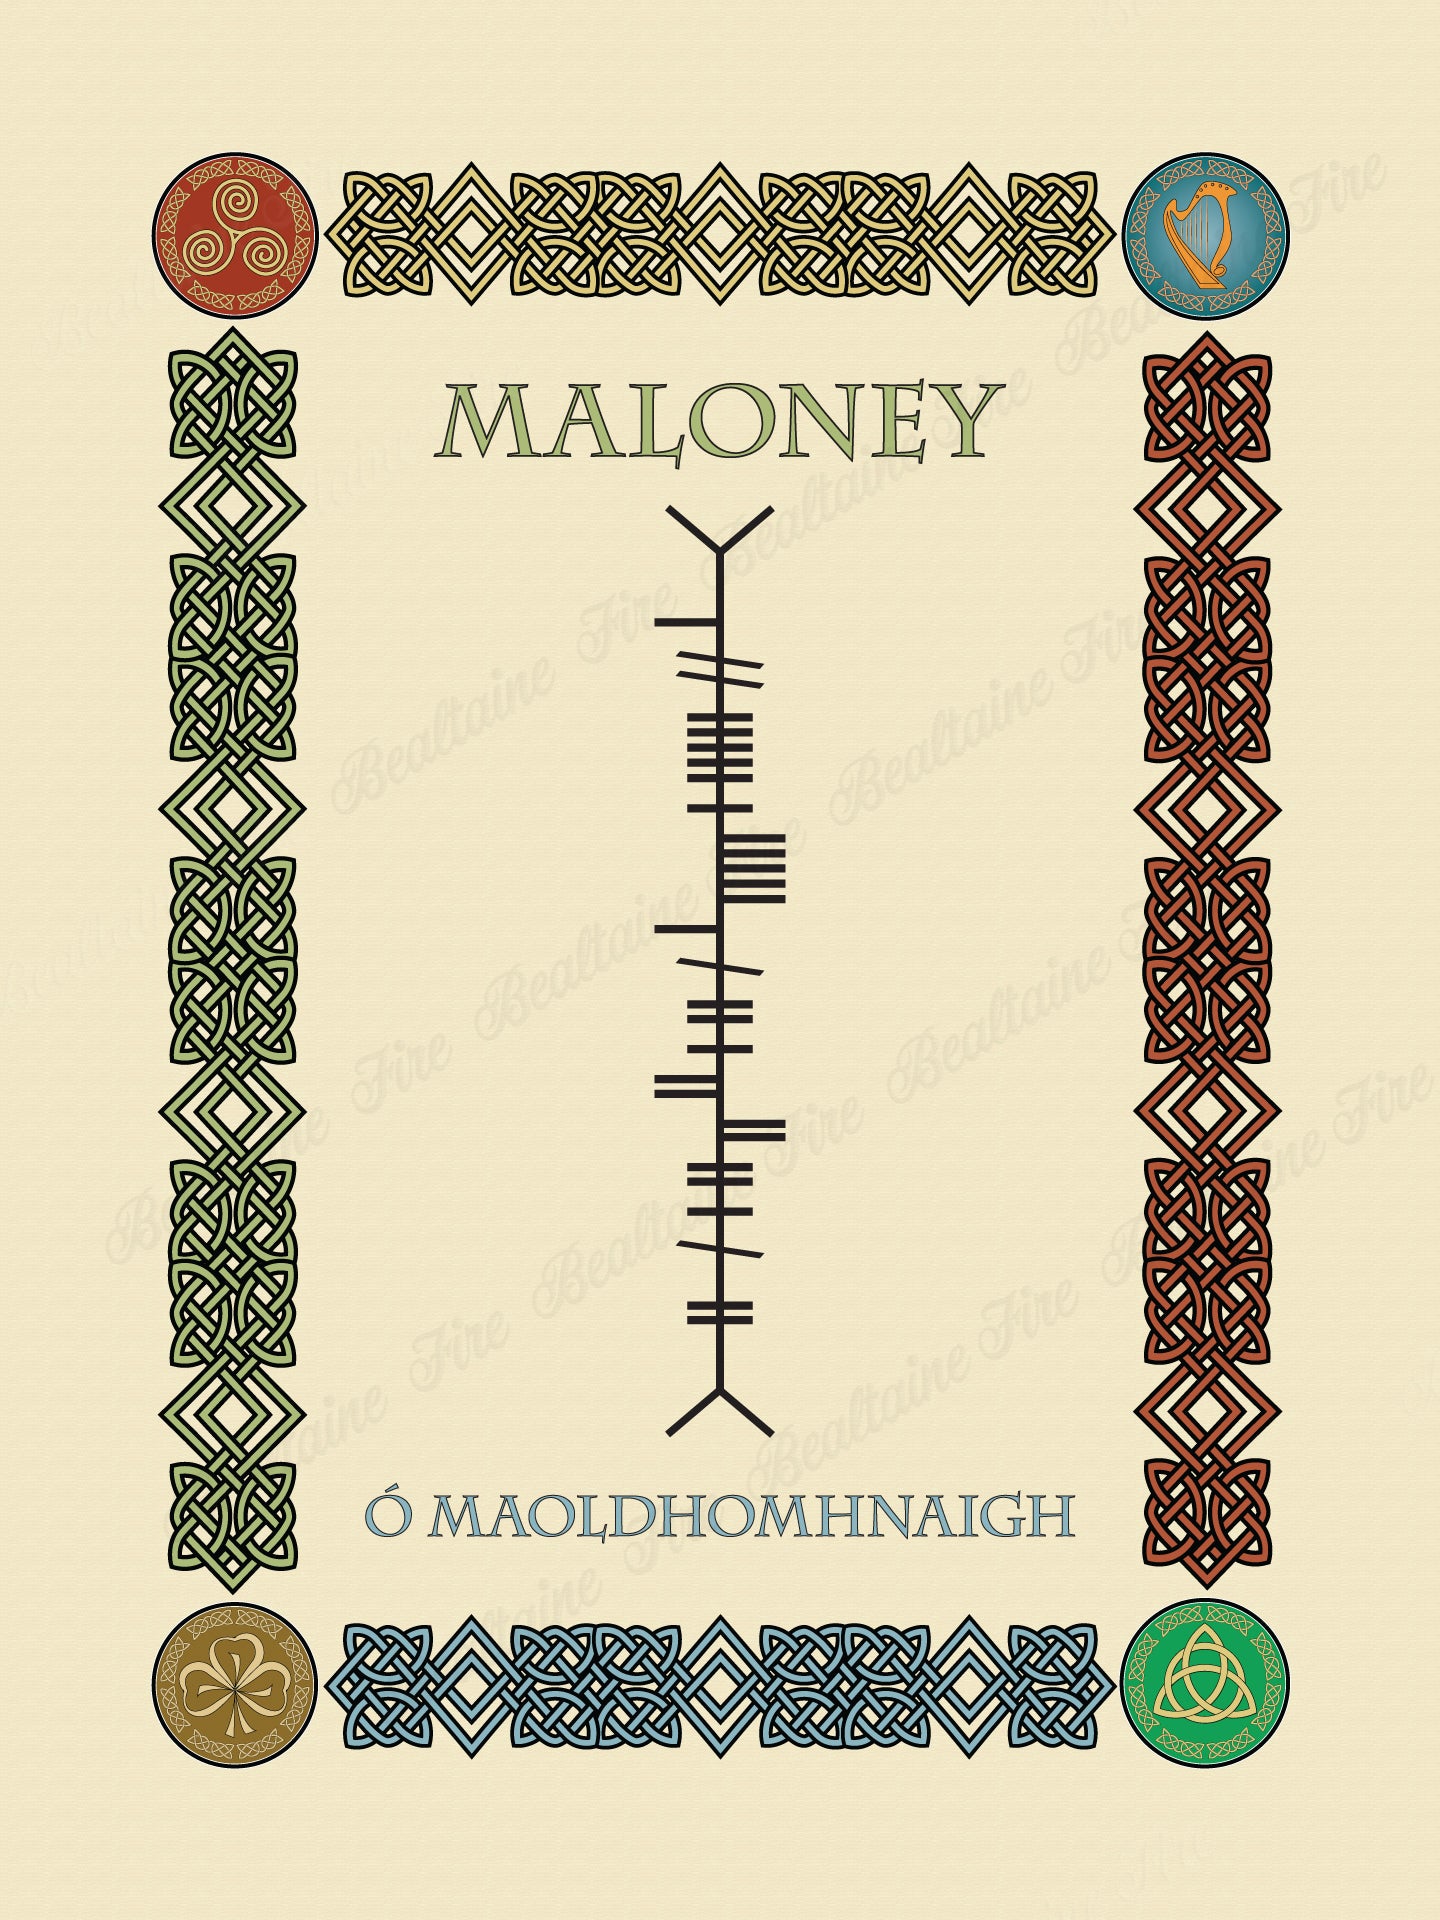 Maloney in Old Irish and Ogham - Premium luster unframed print